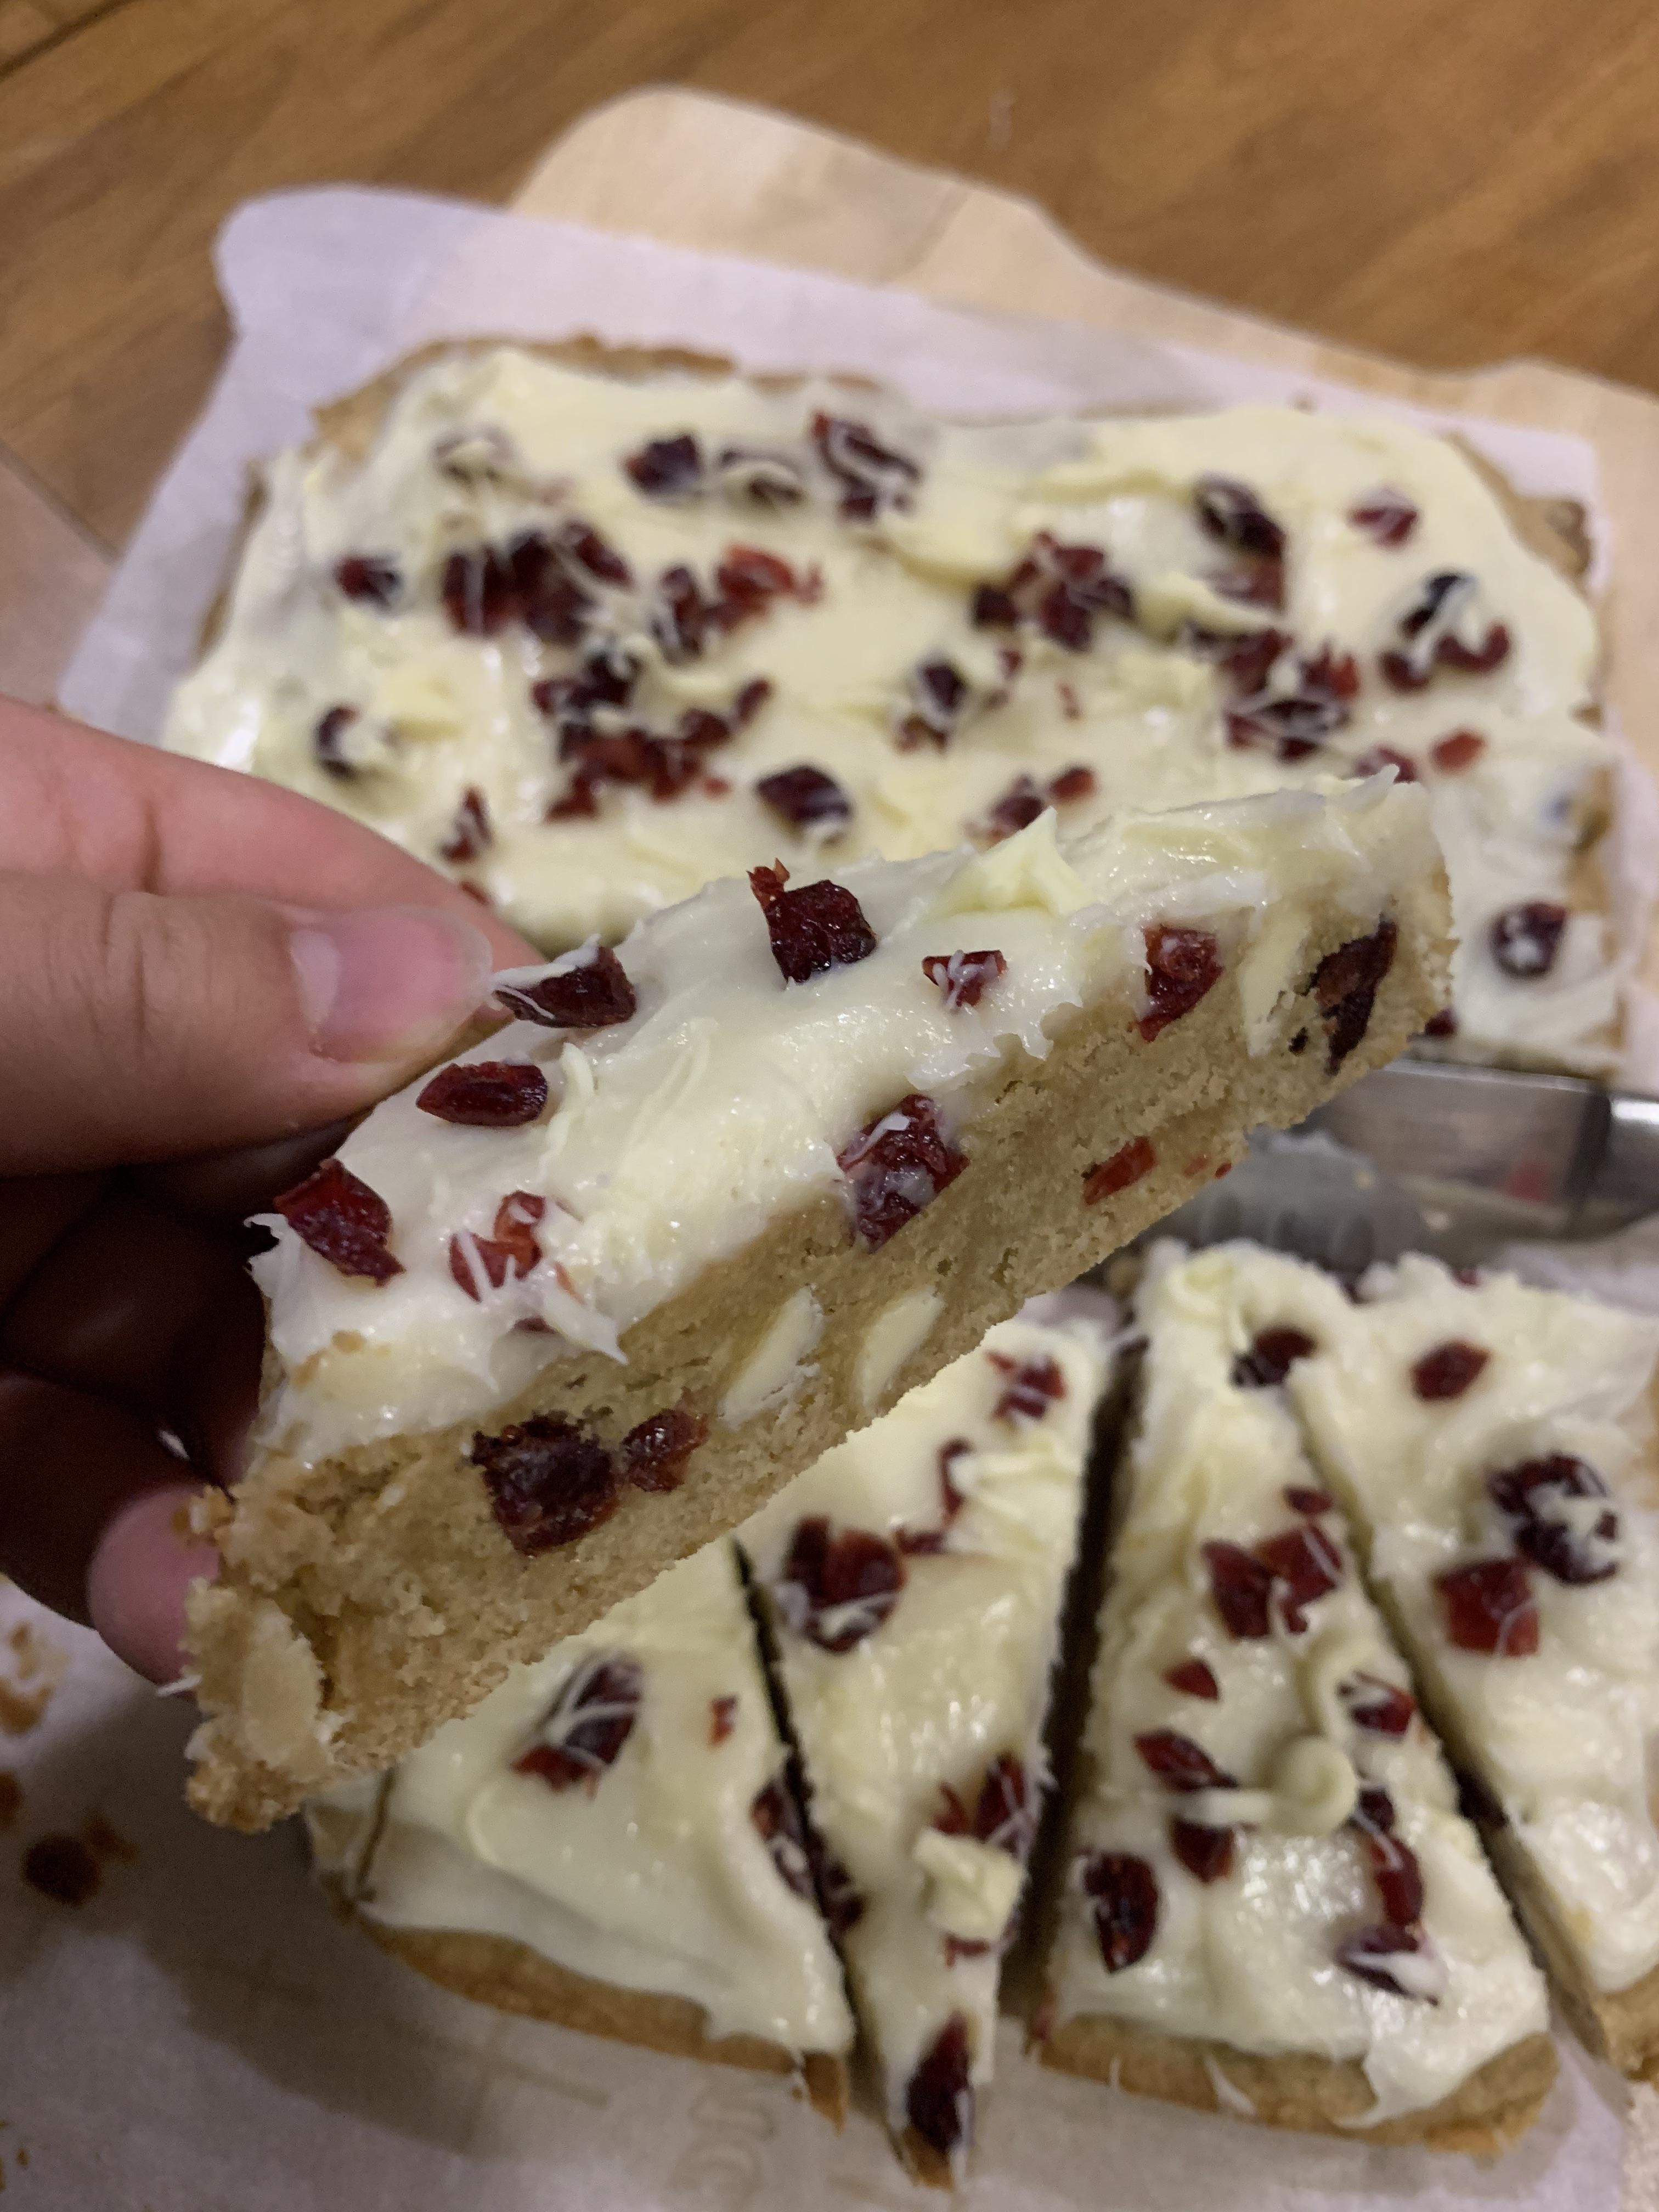 Hand holding a slice of cake topped with cream and cranberries, on a wooden table